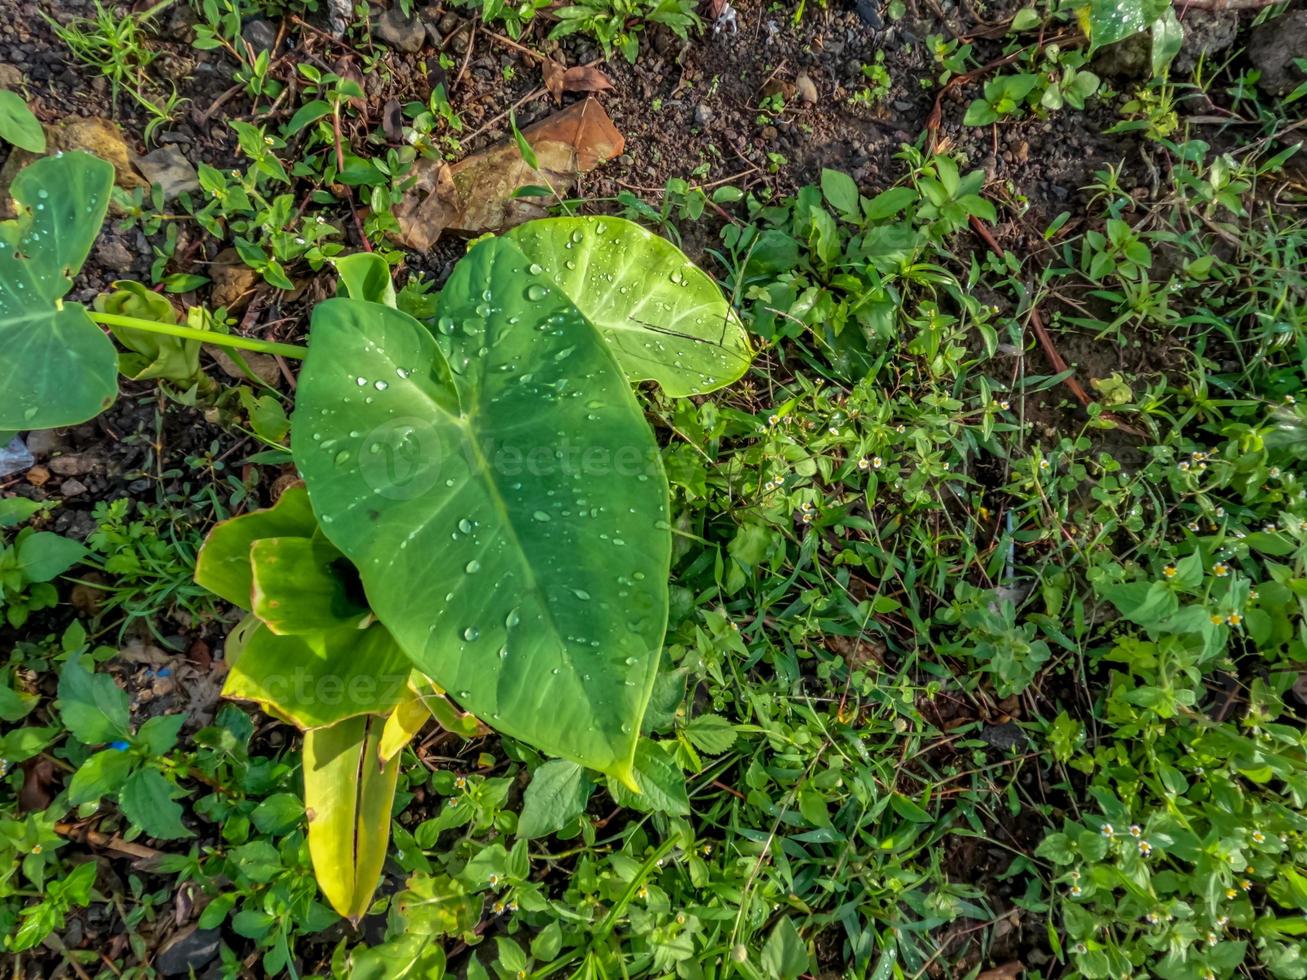 The TAro plant that grows on the side of the road has wide, thin green leaves photo